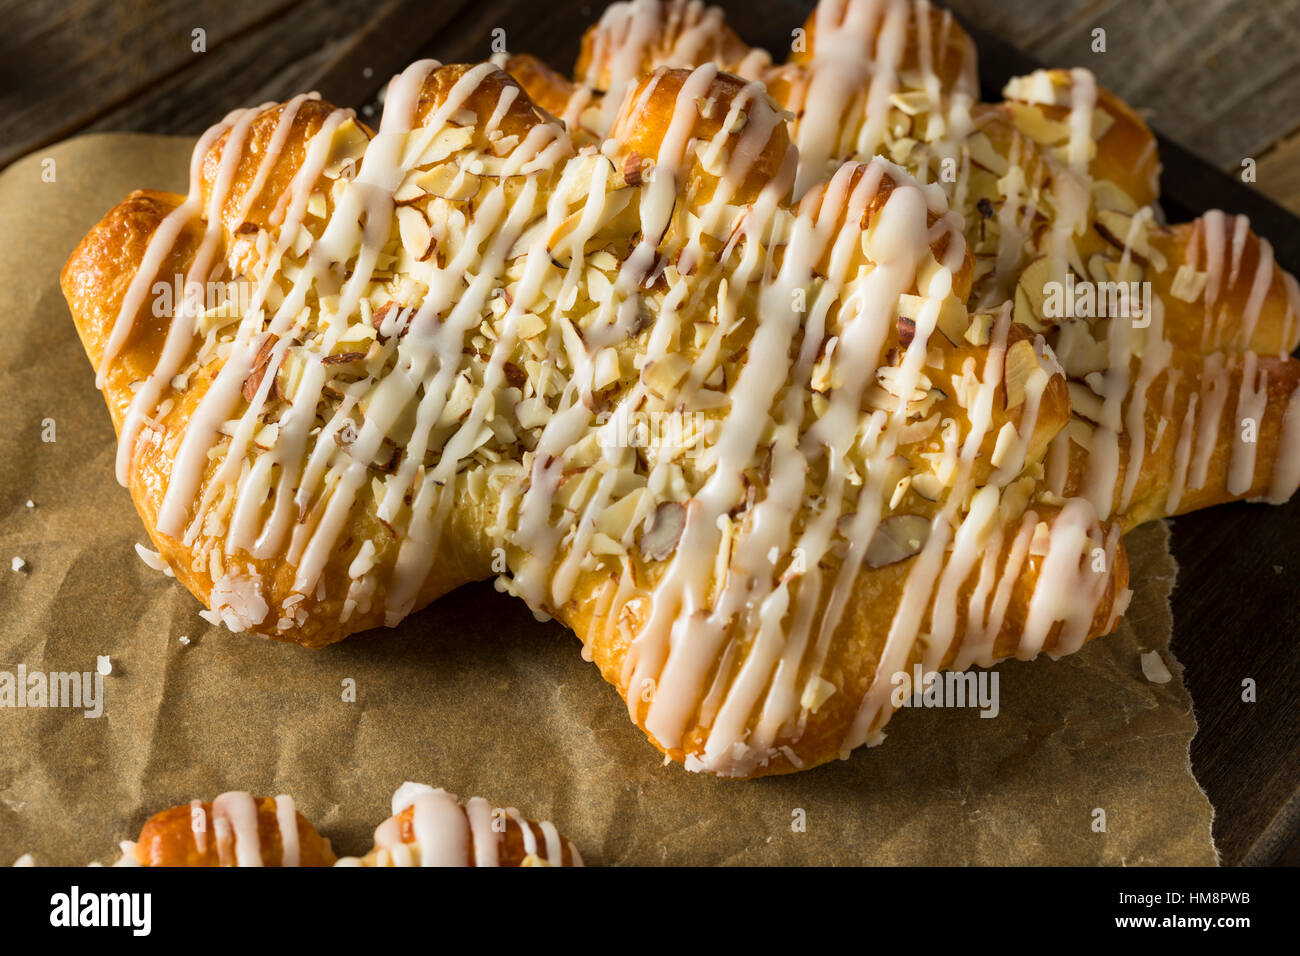 Homemade Sweet Breakfast Bear Claw Pastry with Almonds Stock Photo